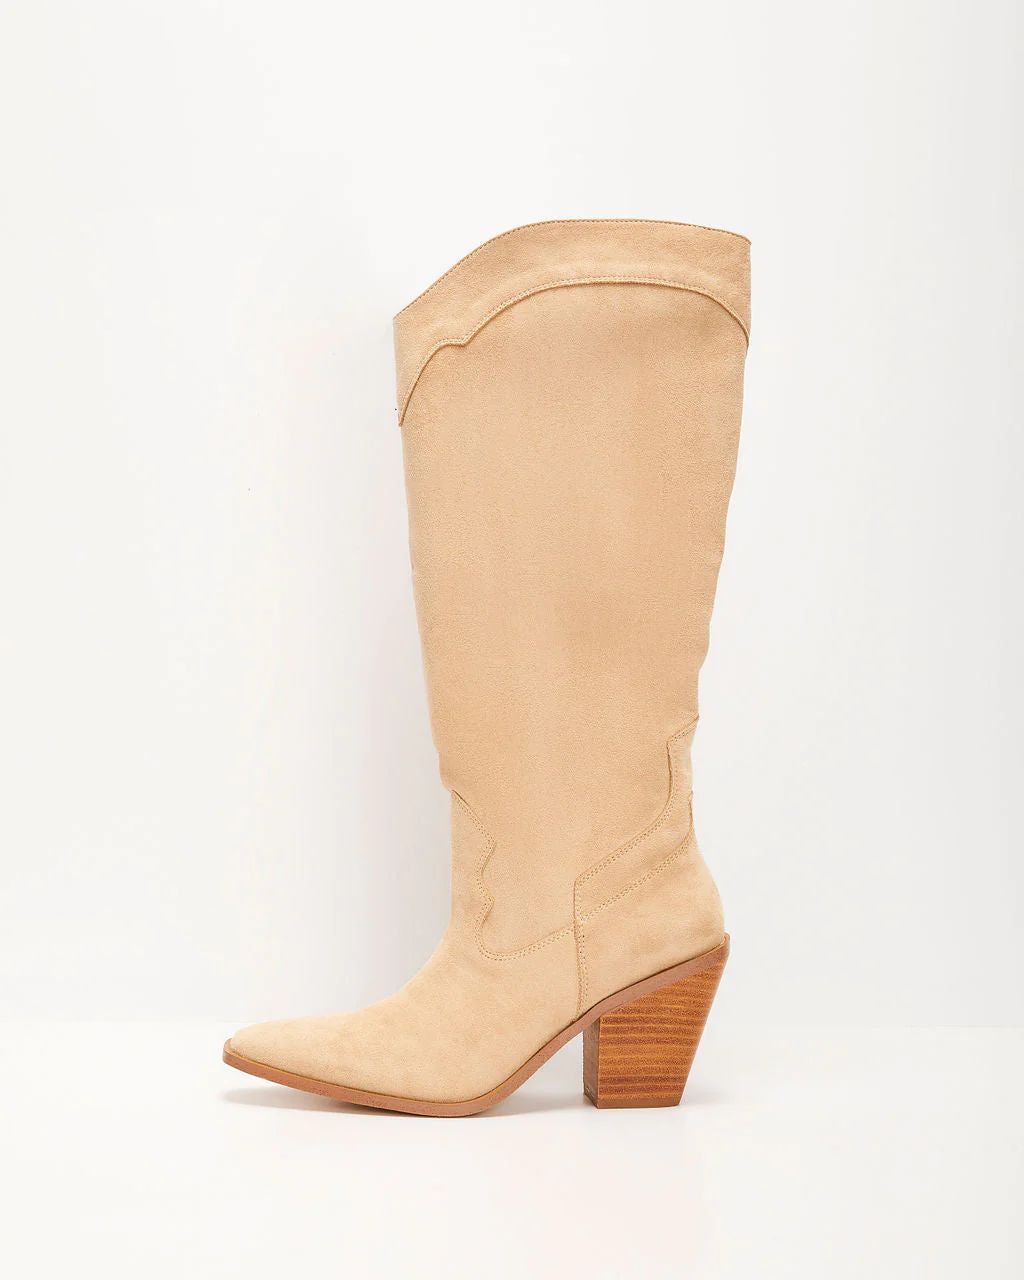 Carlisle Suede Heeled Boots | VICI Collection